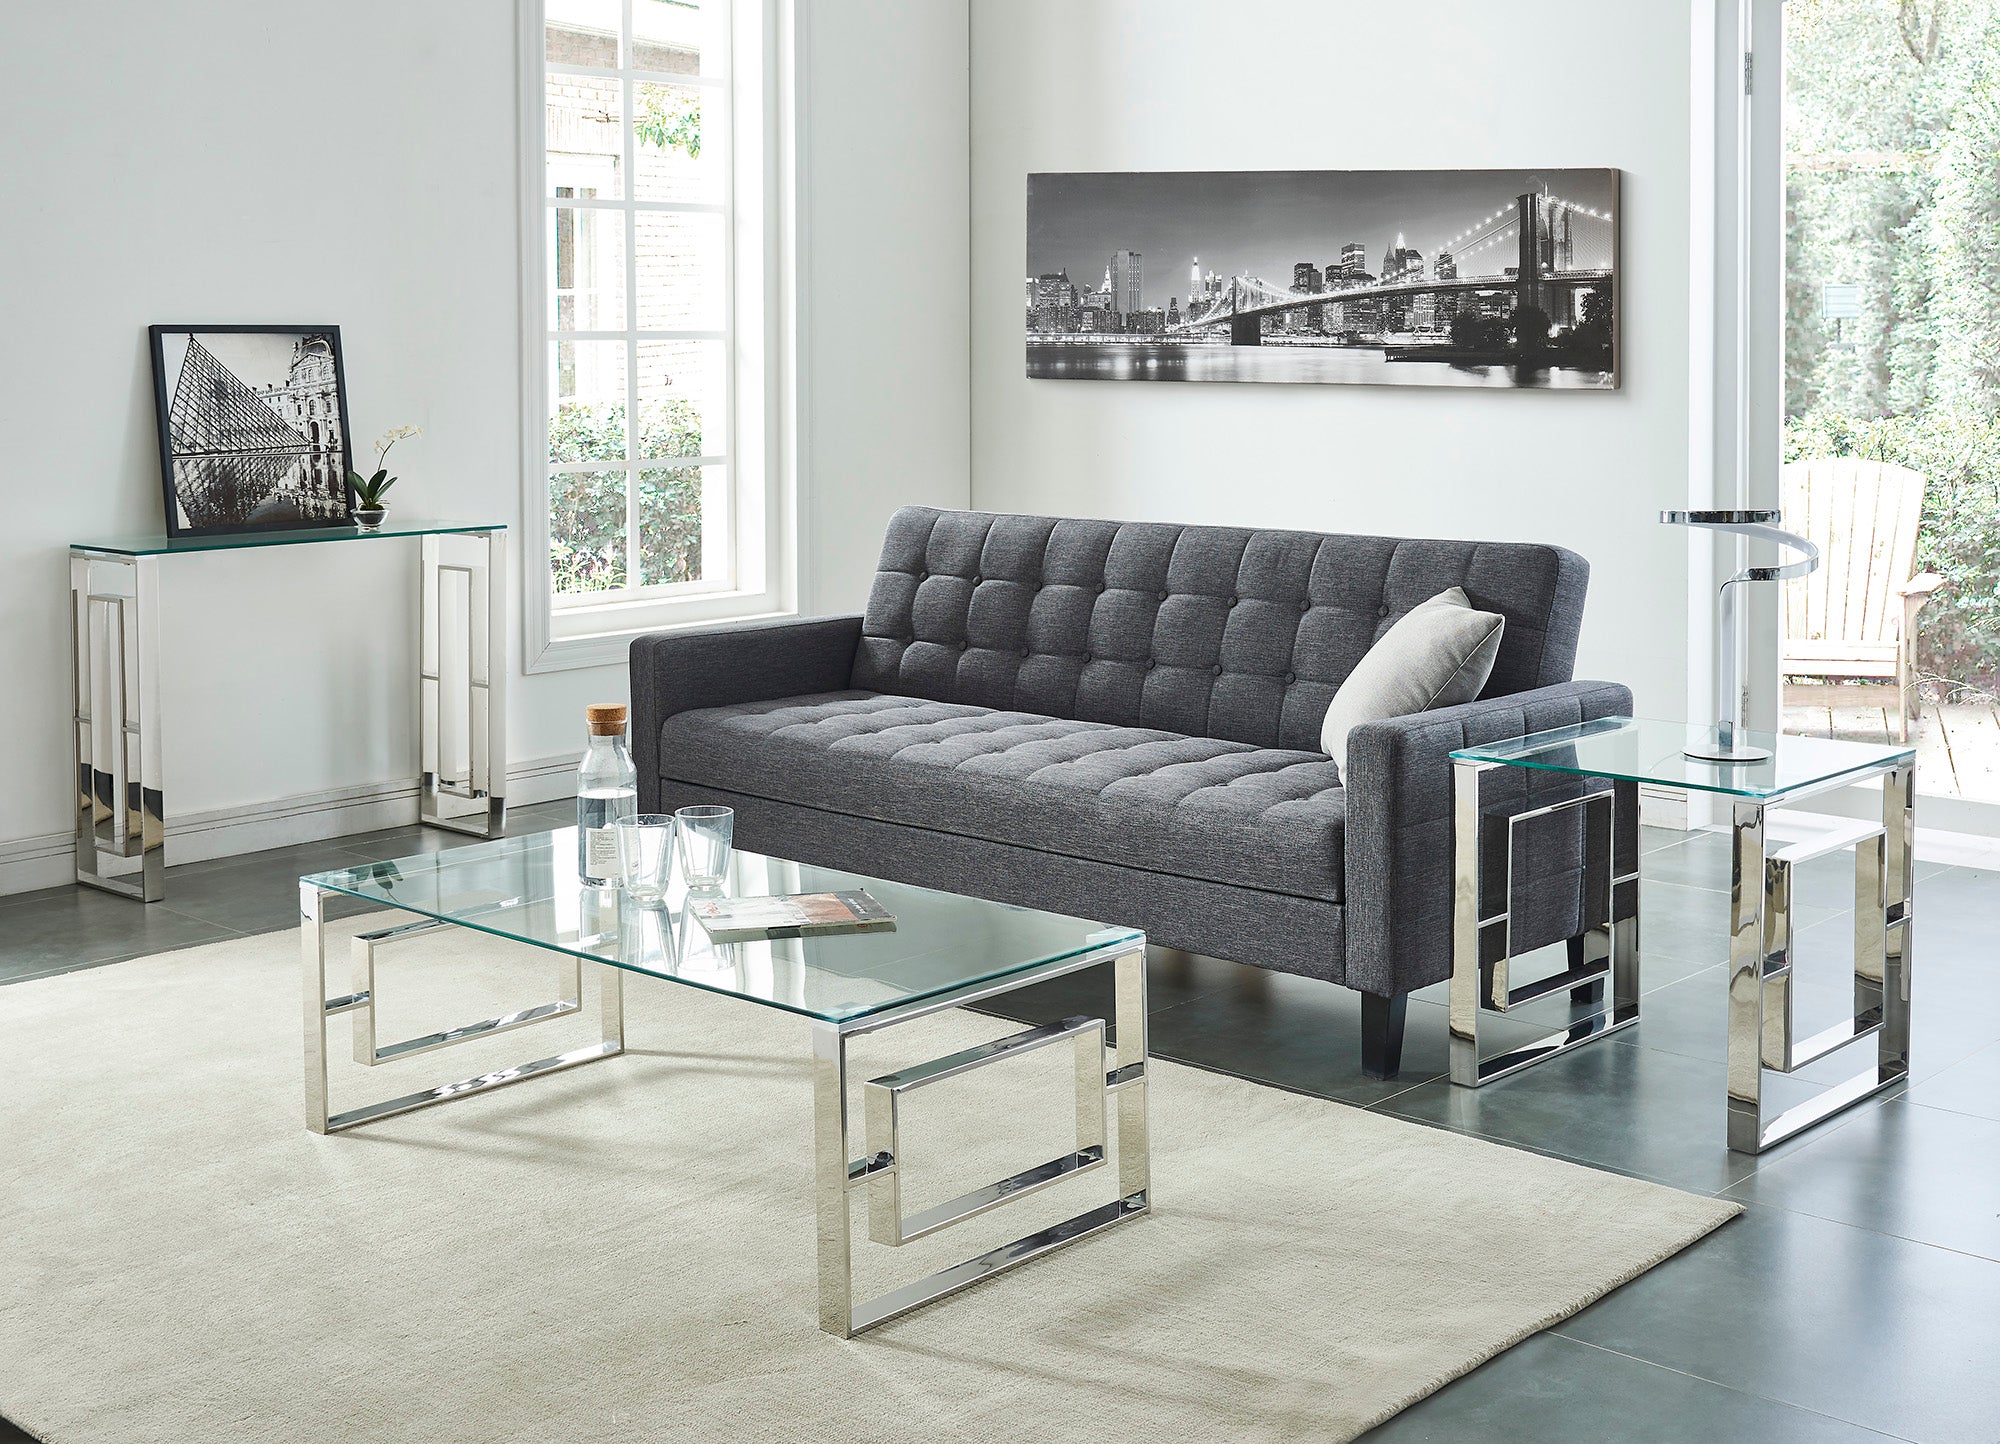 Eros Coffee Table in Silver  301-482CH